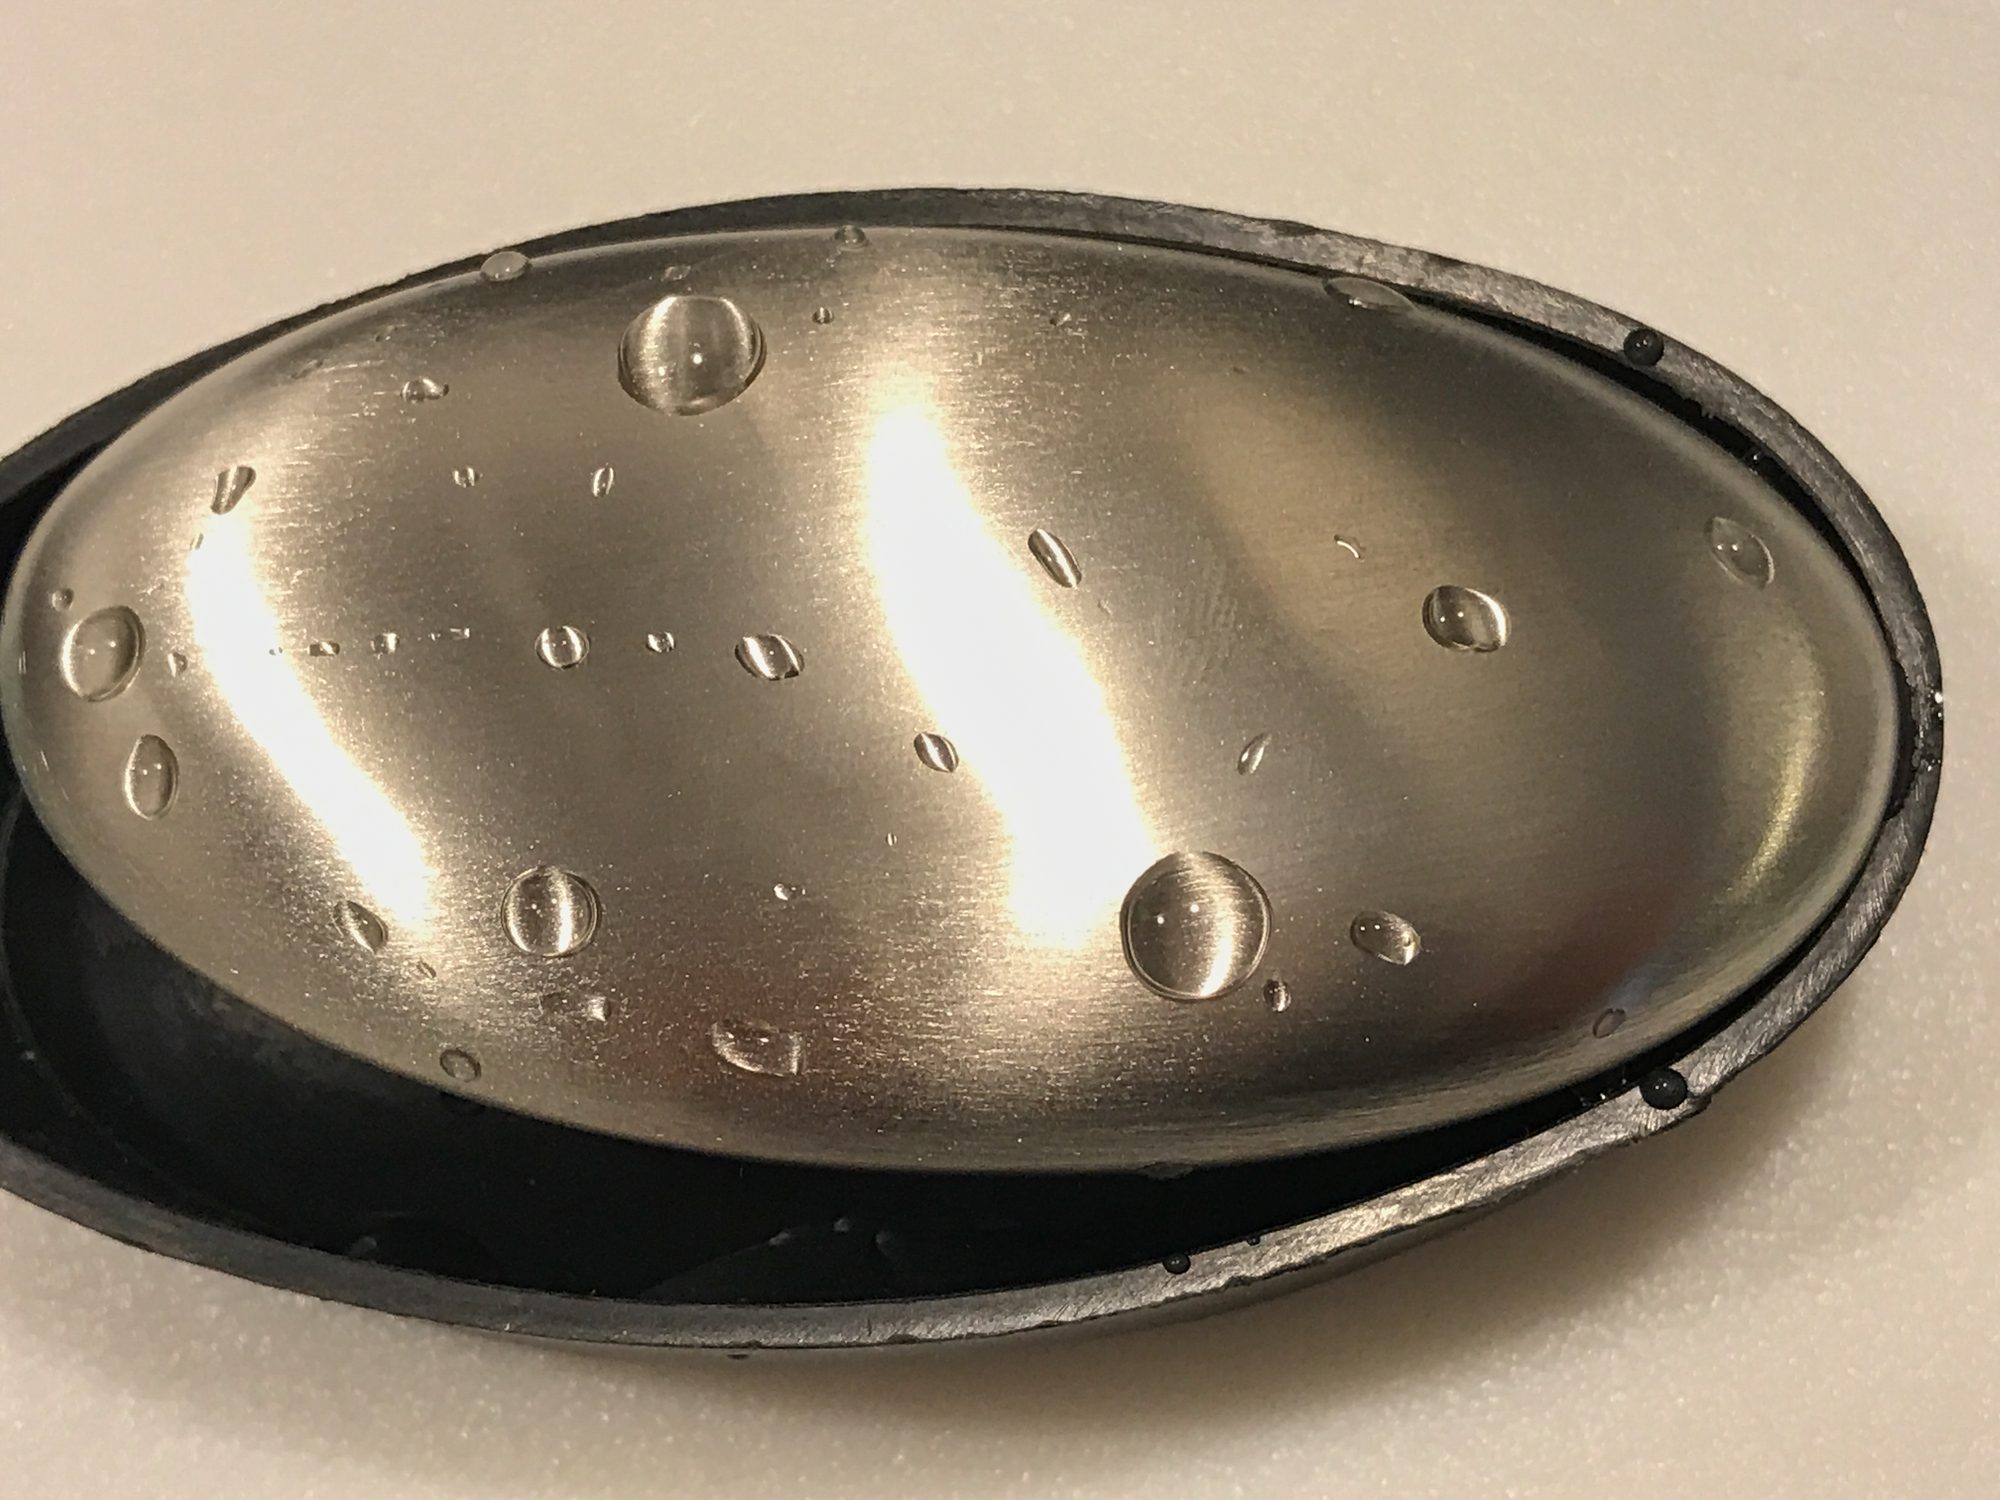 Metal Soap Bar With Water Drops